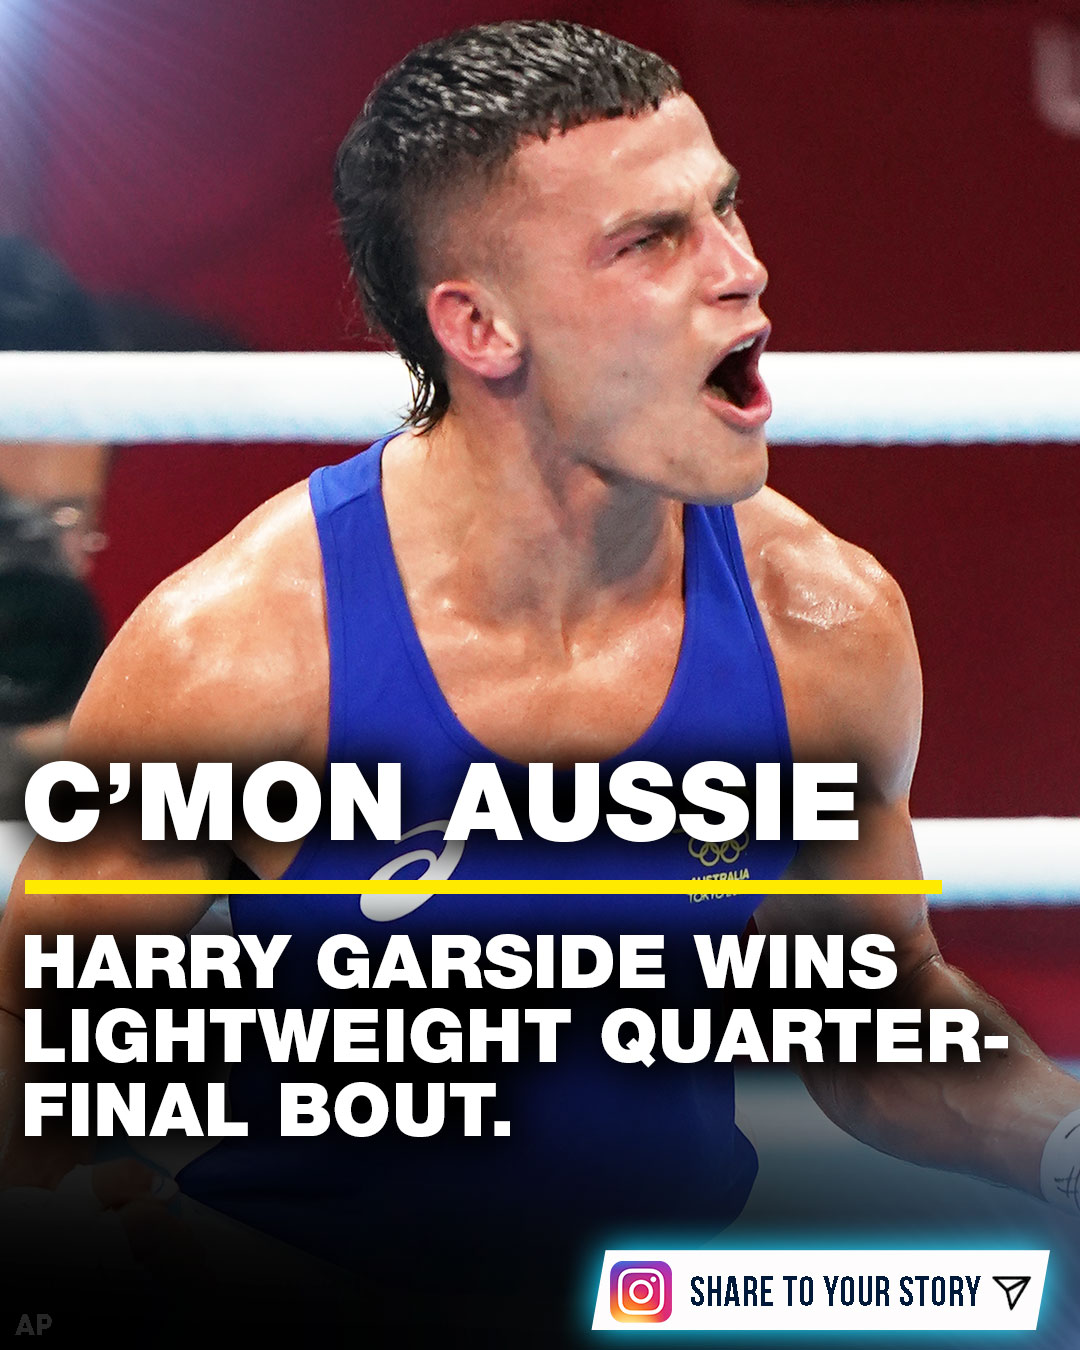 Wide World Of Sports On Twitter You Beauty Harry Garside Becomes The First Australian Boxer To Win An Olympic Medal In 33 Years Live Blog Https T Co Udg2x1aulh Https T Co I4qlgaazst